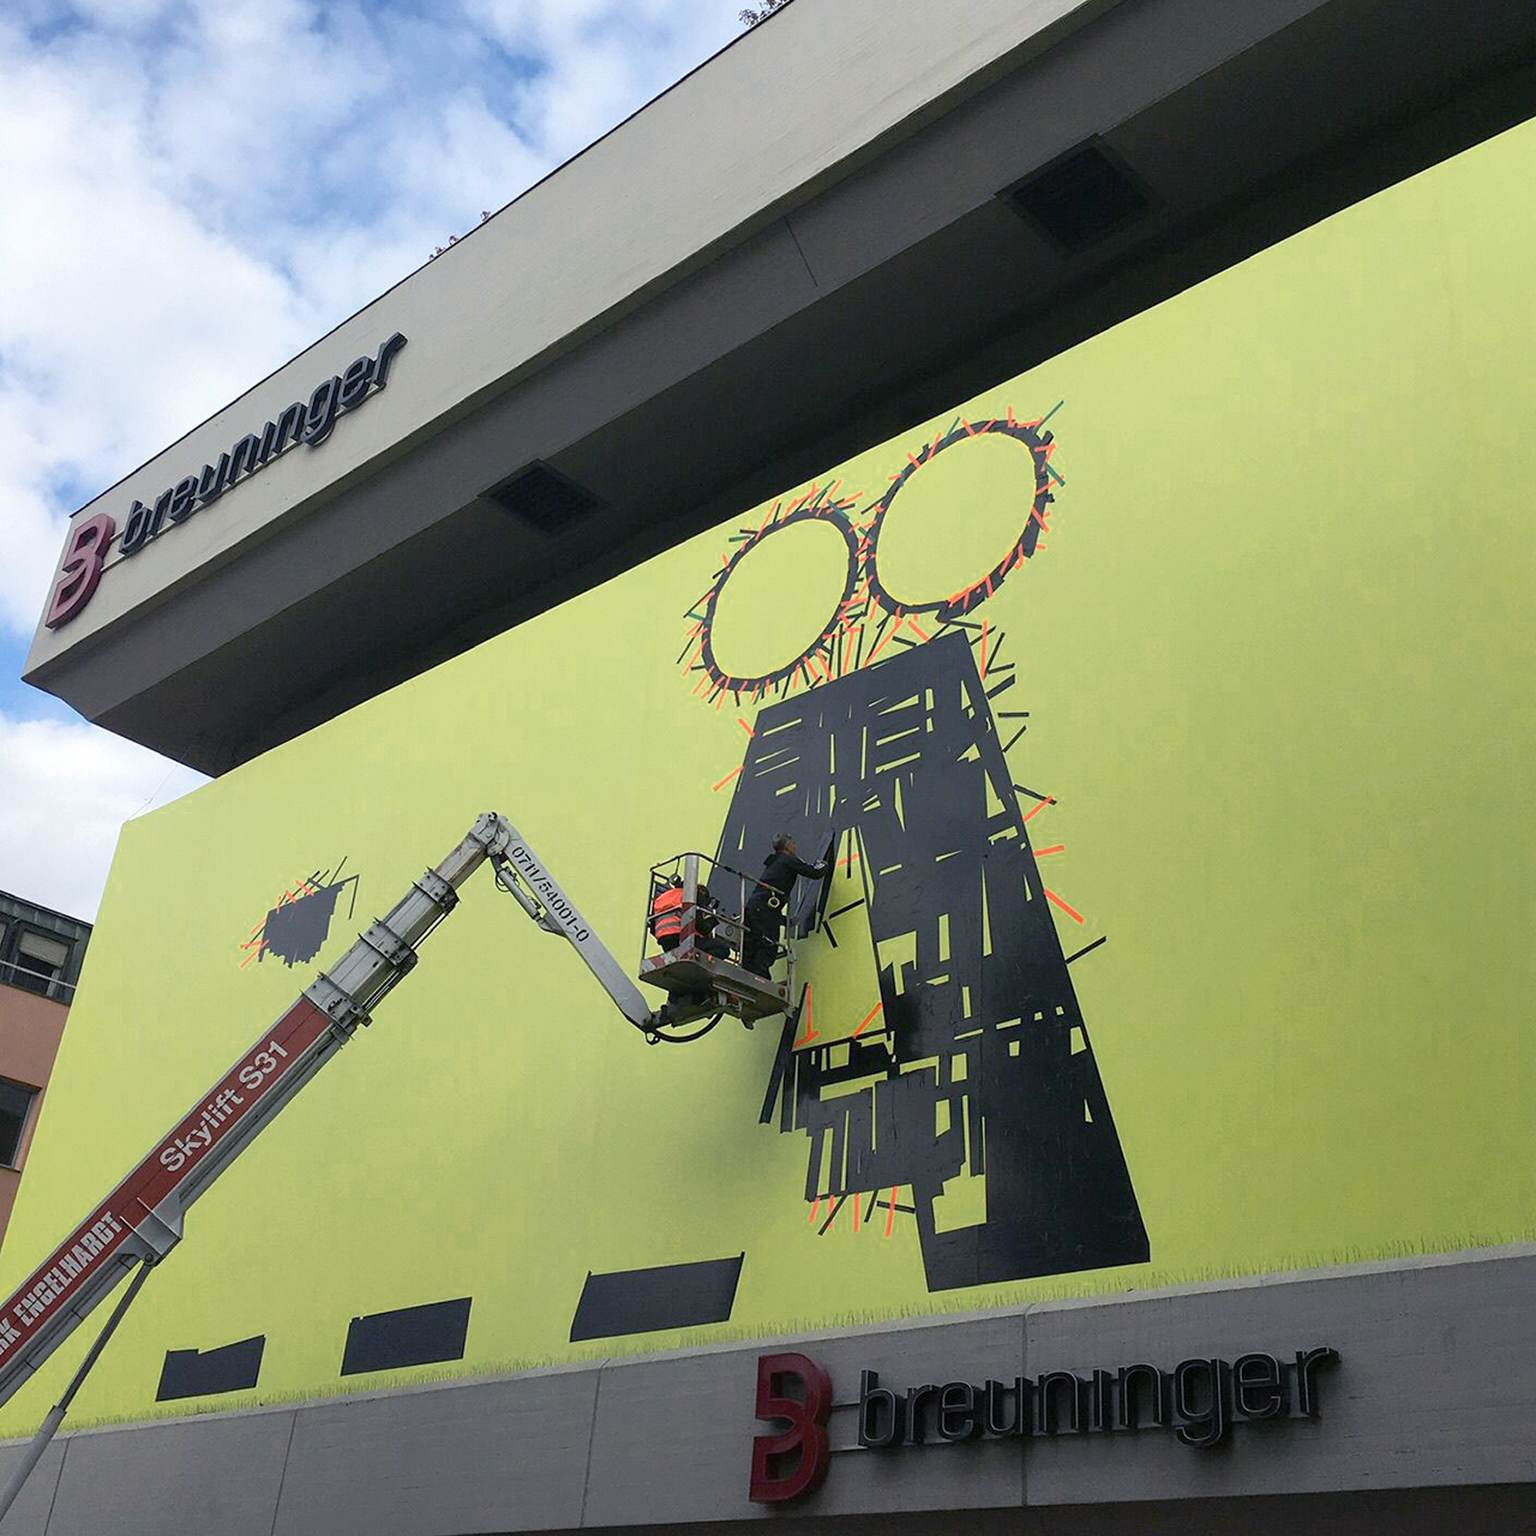 THE LÄND banner gets attached to the Breuninger shopping center.